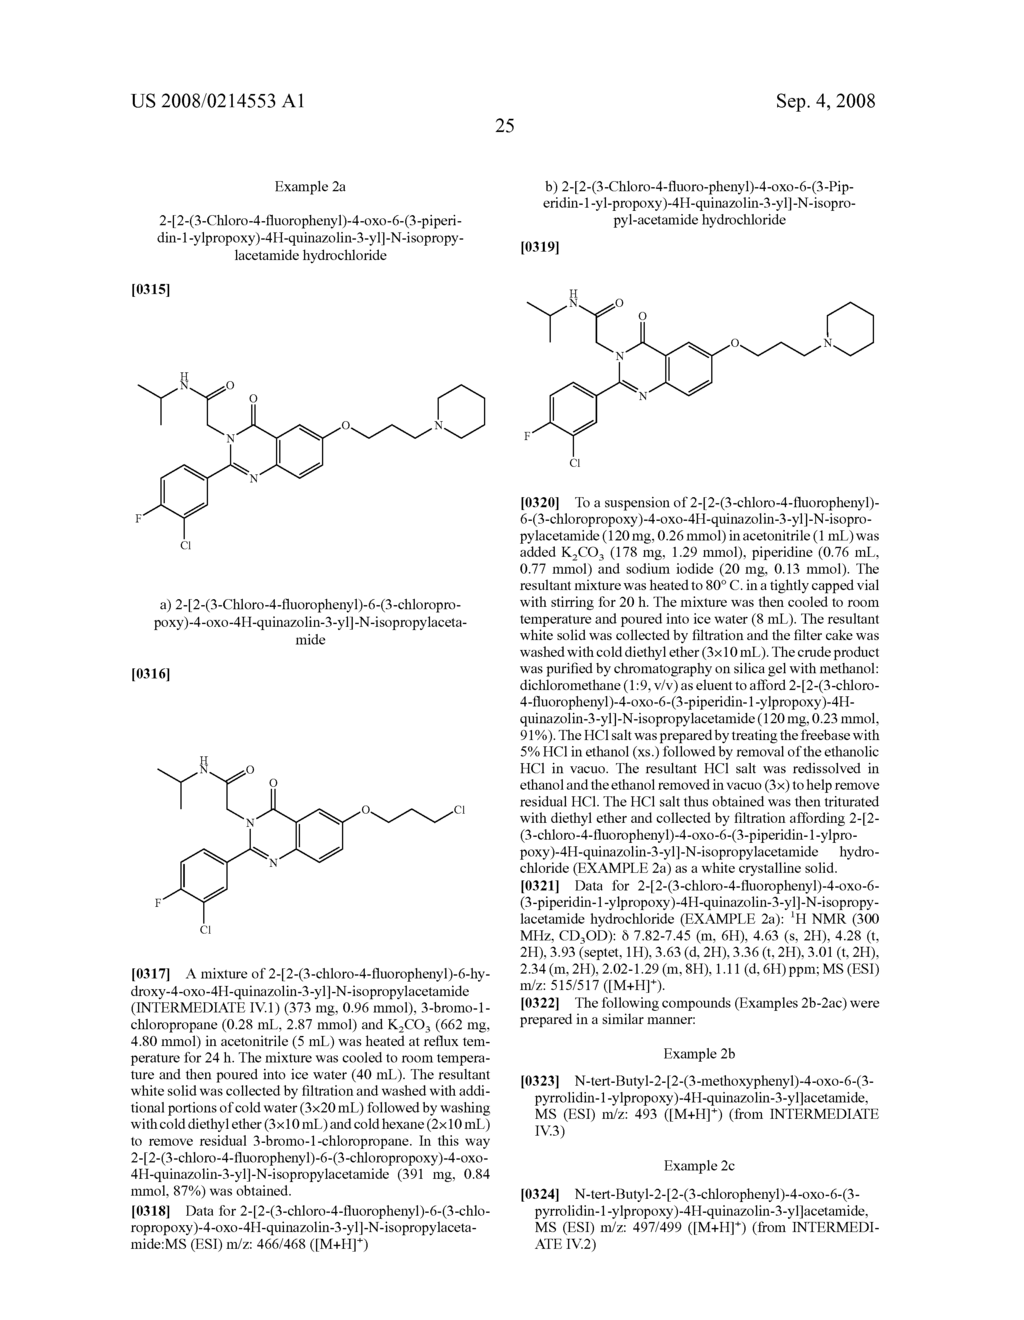 2-(4-Oxo-4H-Quinazolin-3-Yl) Acetamides and Their Use as Vasopressin V3 Antagonists - diagram, schematic, and image 26